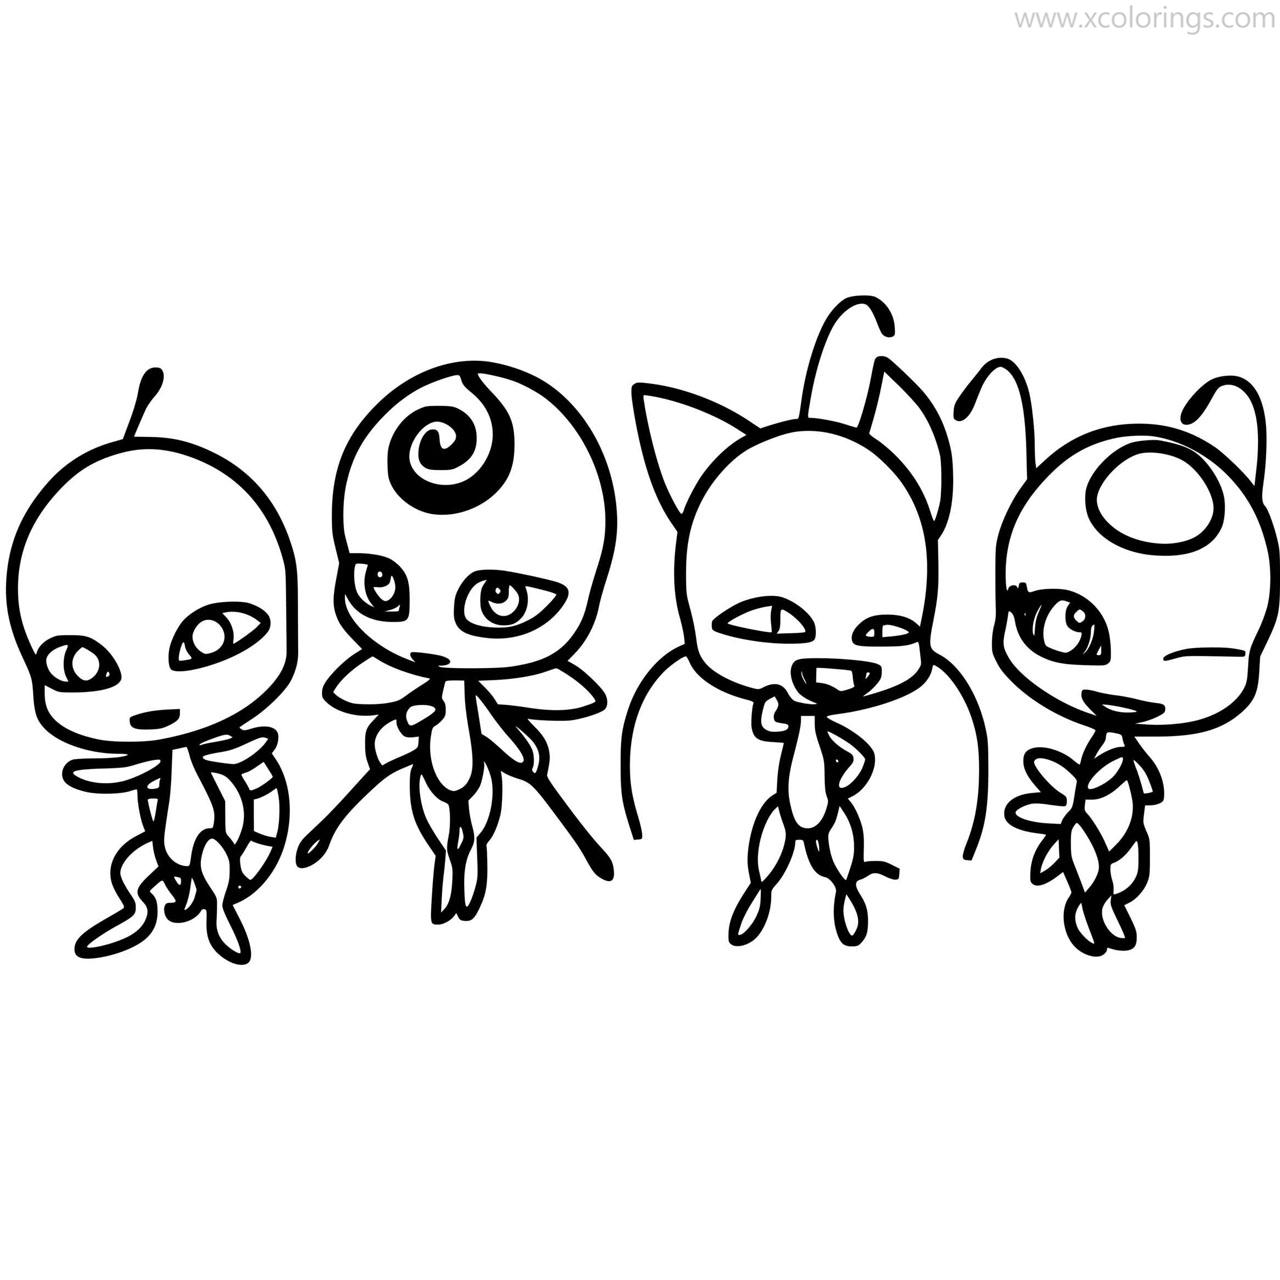 Miraculous Ladybug Coloring Pages Free Free Printable Templates